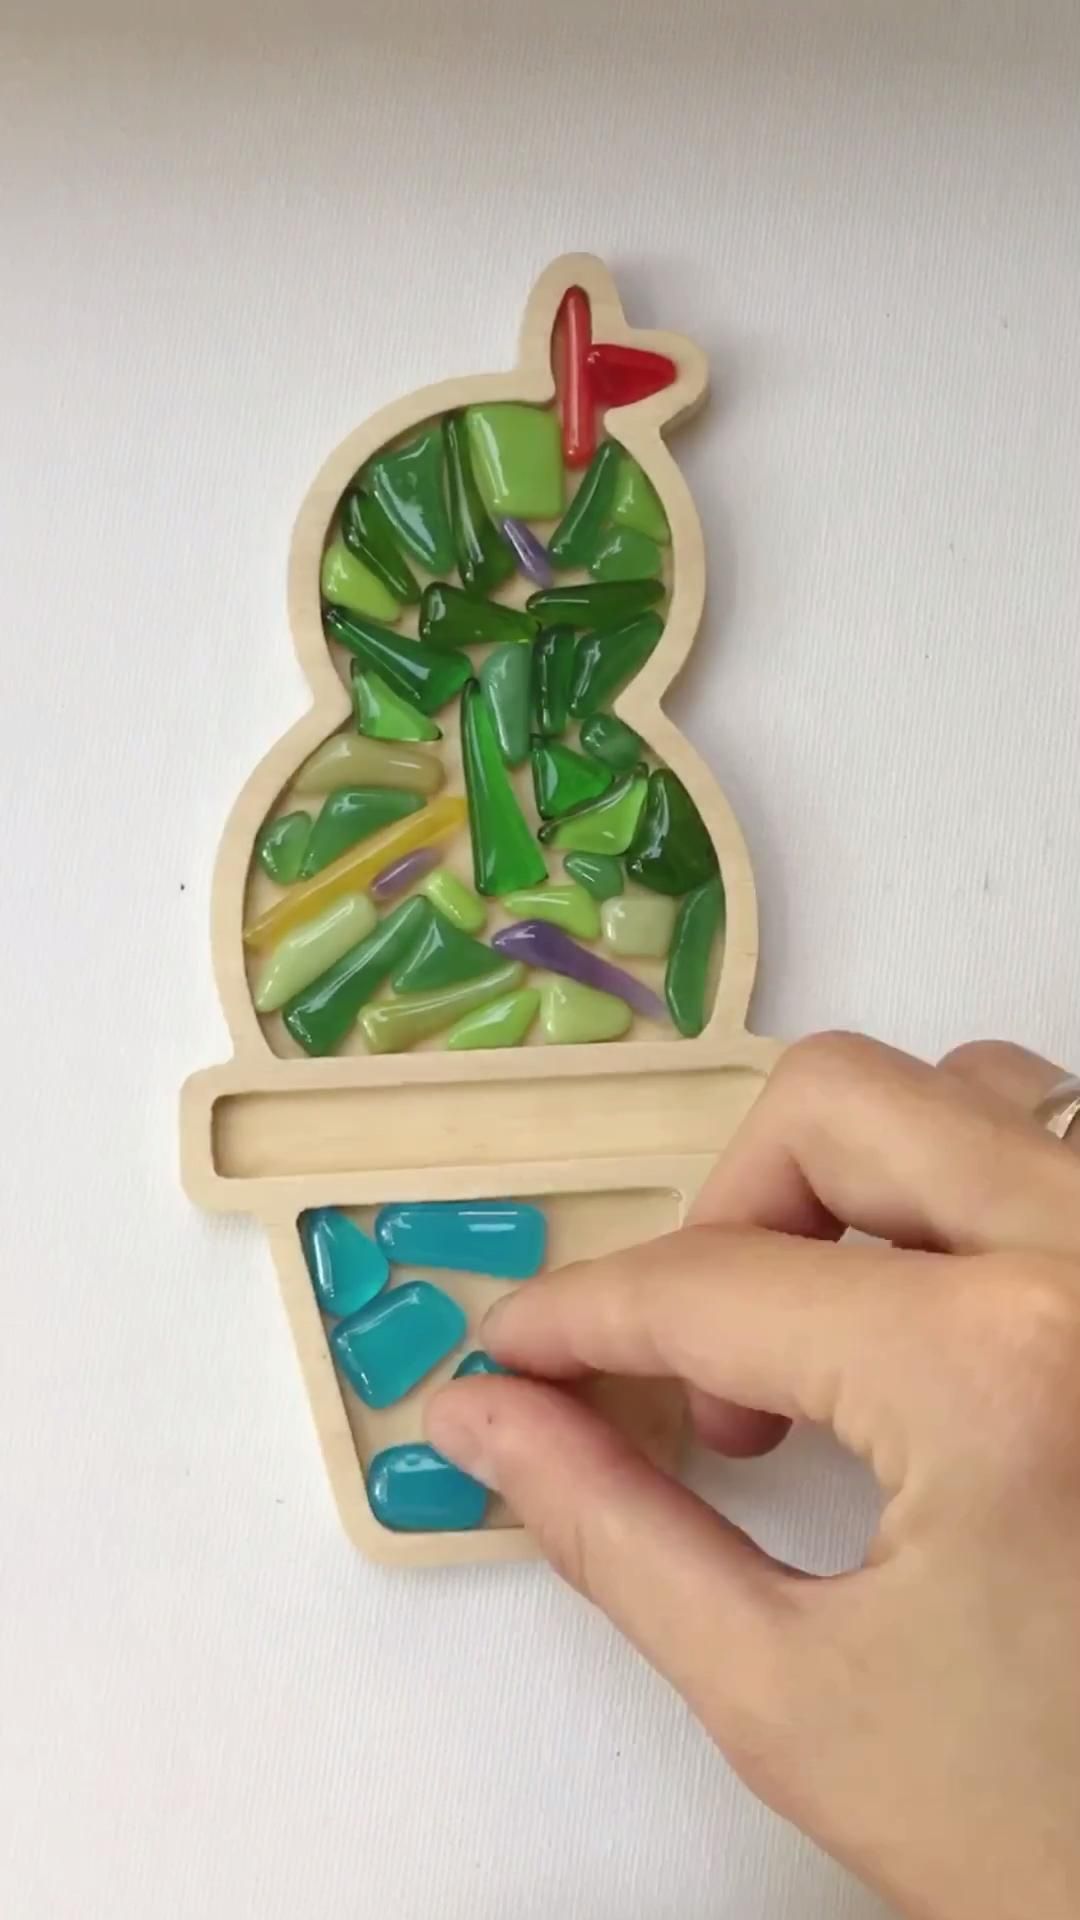 Stained glass art project for kids -   18 diy projects for kids room ideas